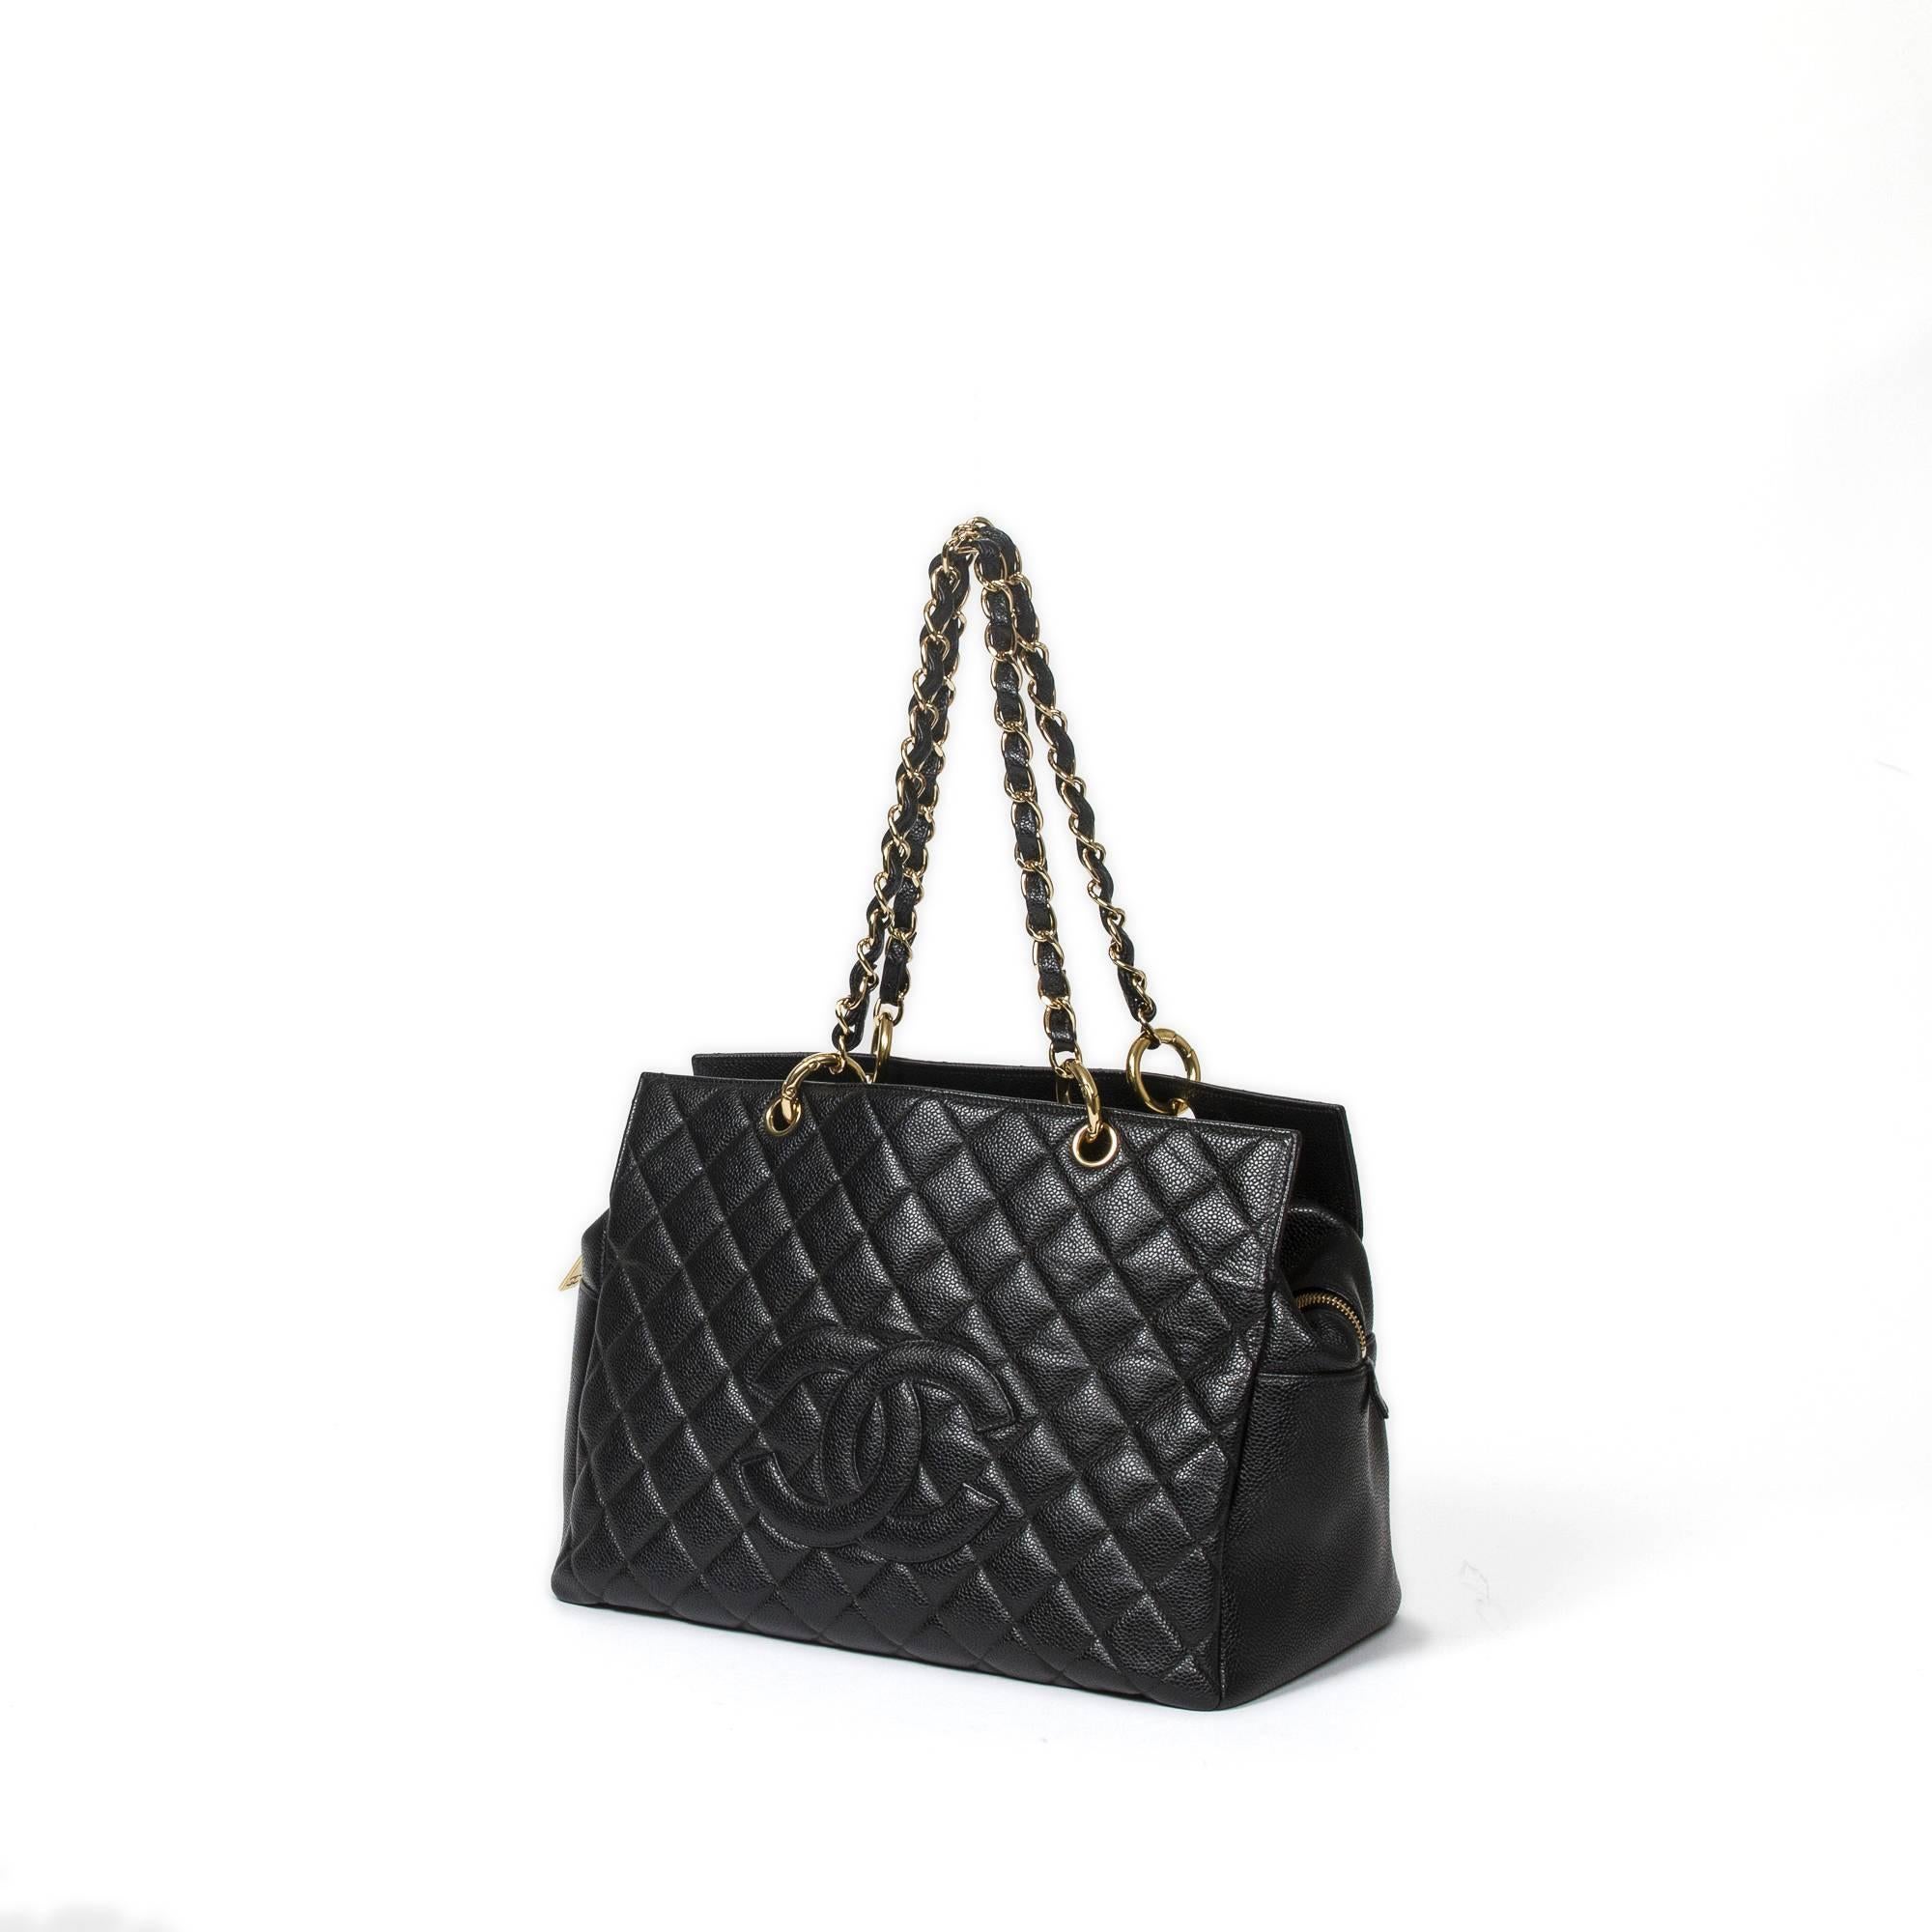 Chanel shoulder bag Grand Shopper Tote MM 34cm in black grained quilted leather, chain shoulder straps interlaced with leather (22cm), gold tone hardware. This shoulder bag has one large slip pocket on on the front and at the back, zipper closure.